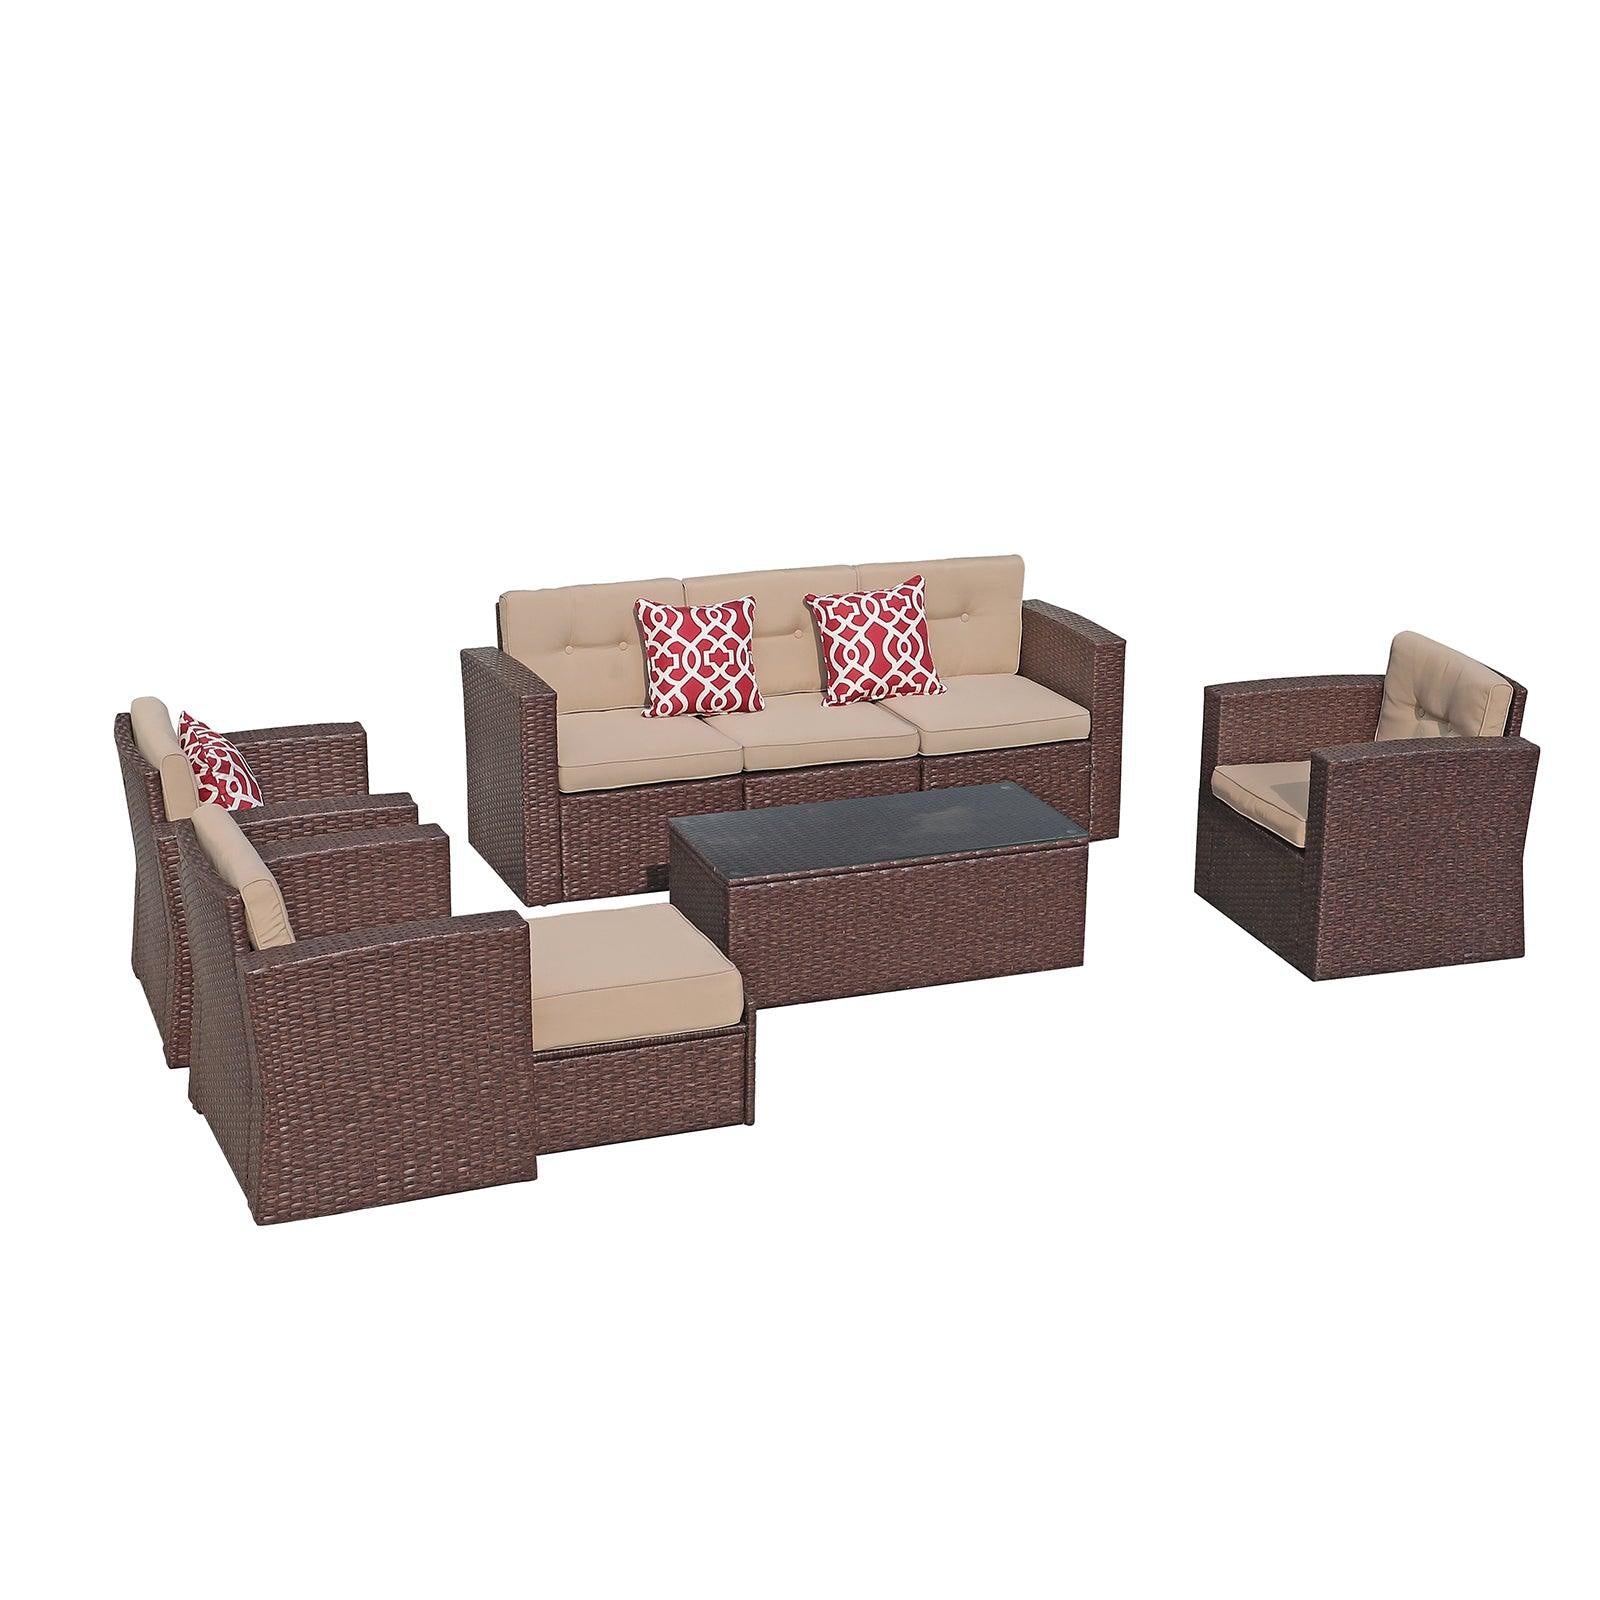 San Terraza 8-pc. Outdoor Conversation Sets with Ottoman sale hot